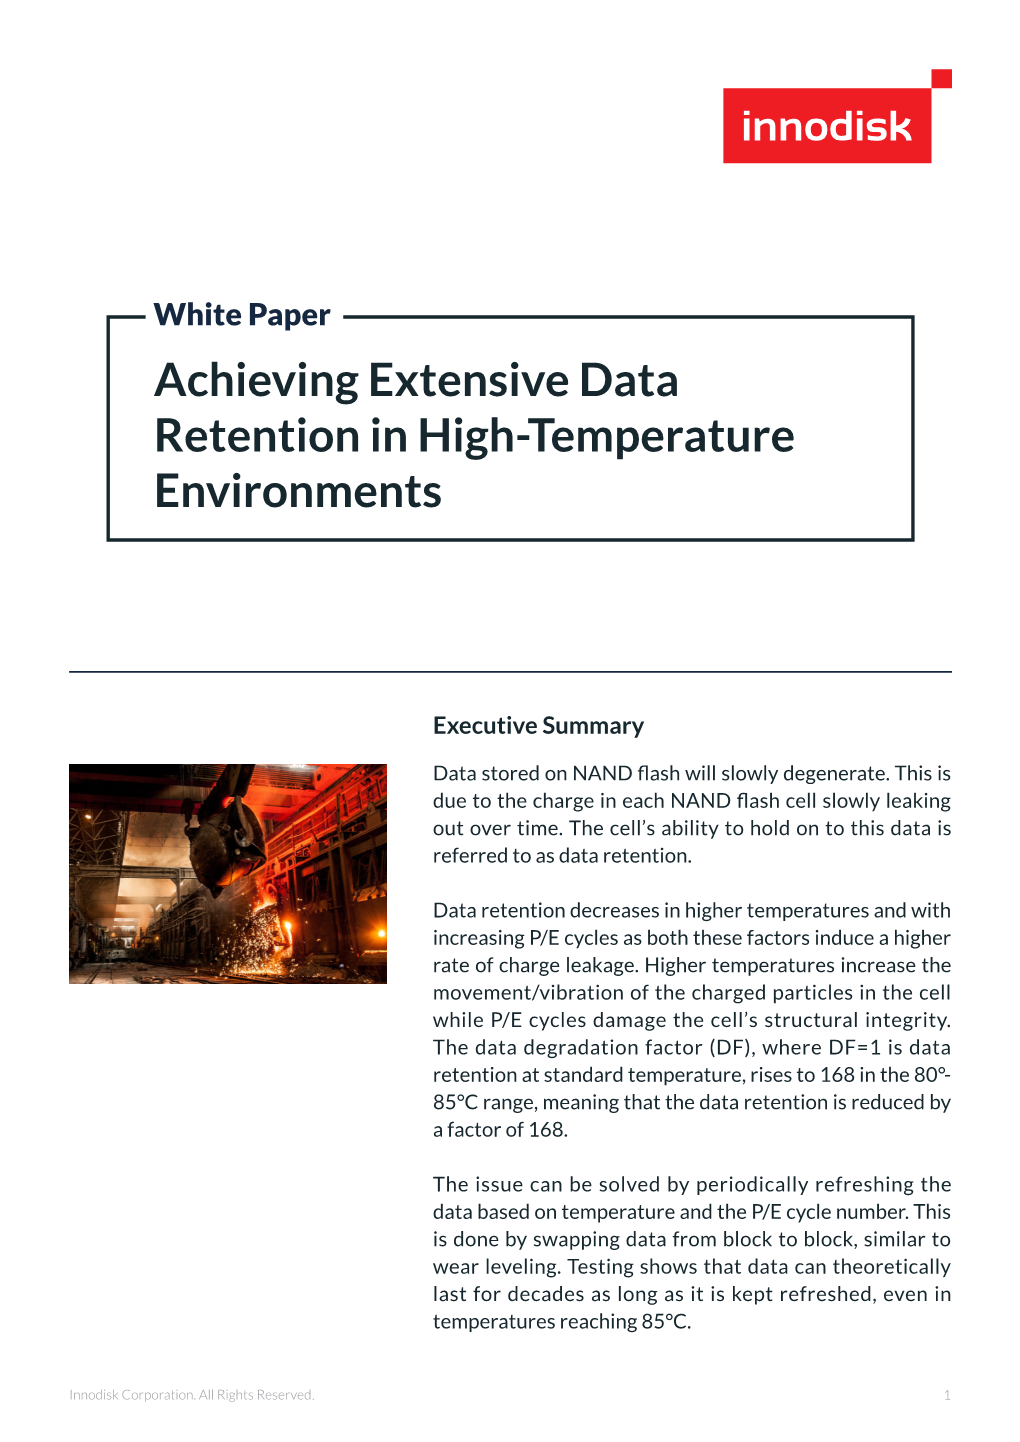 Achieving Extensive Data Retention in High-Temperature Environments